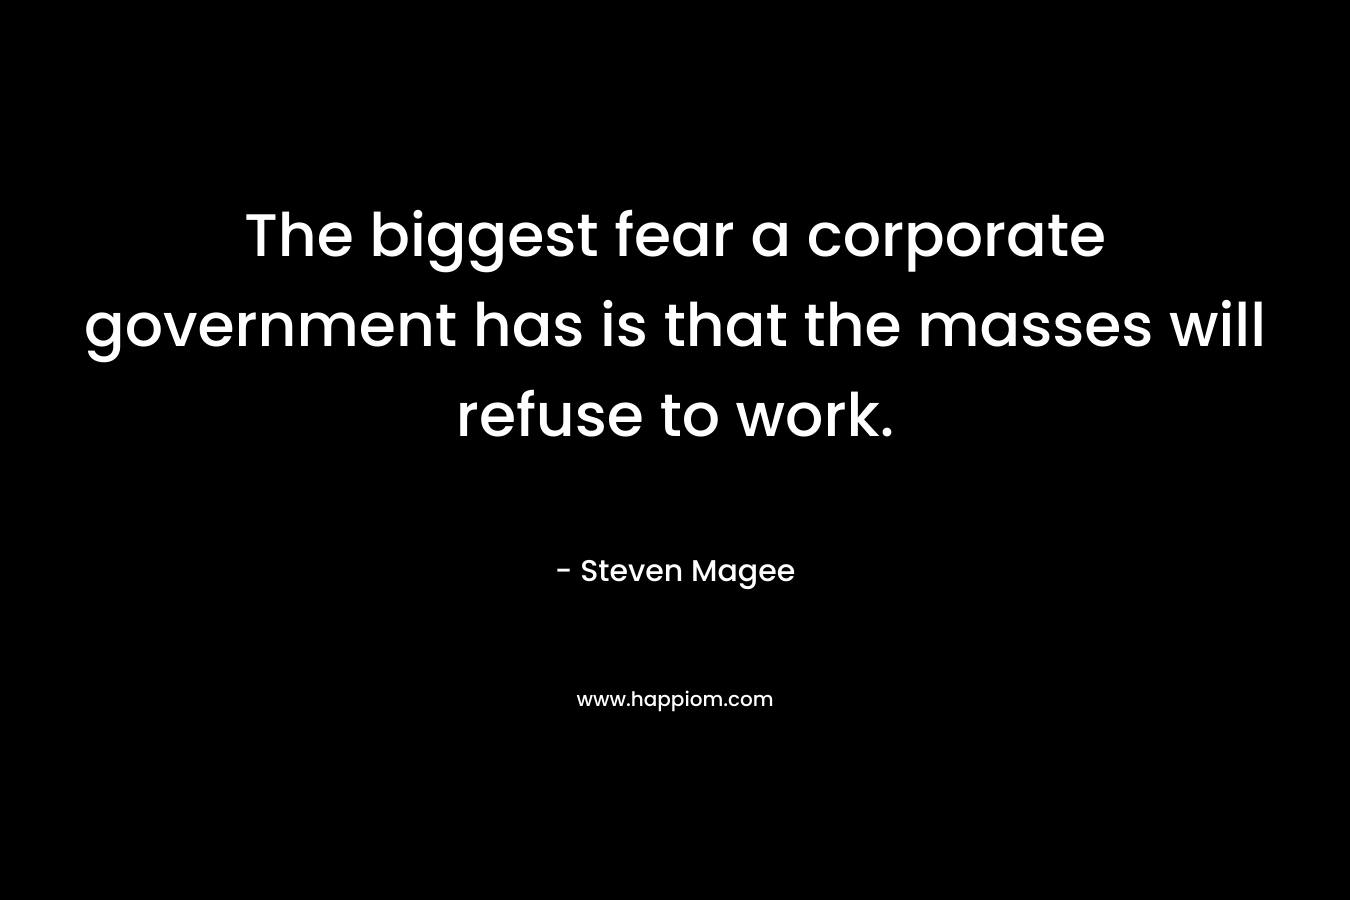 The biggest fear a corporate government has is that the masses will refuse to work.